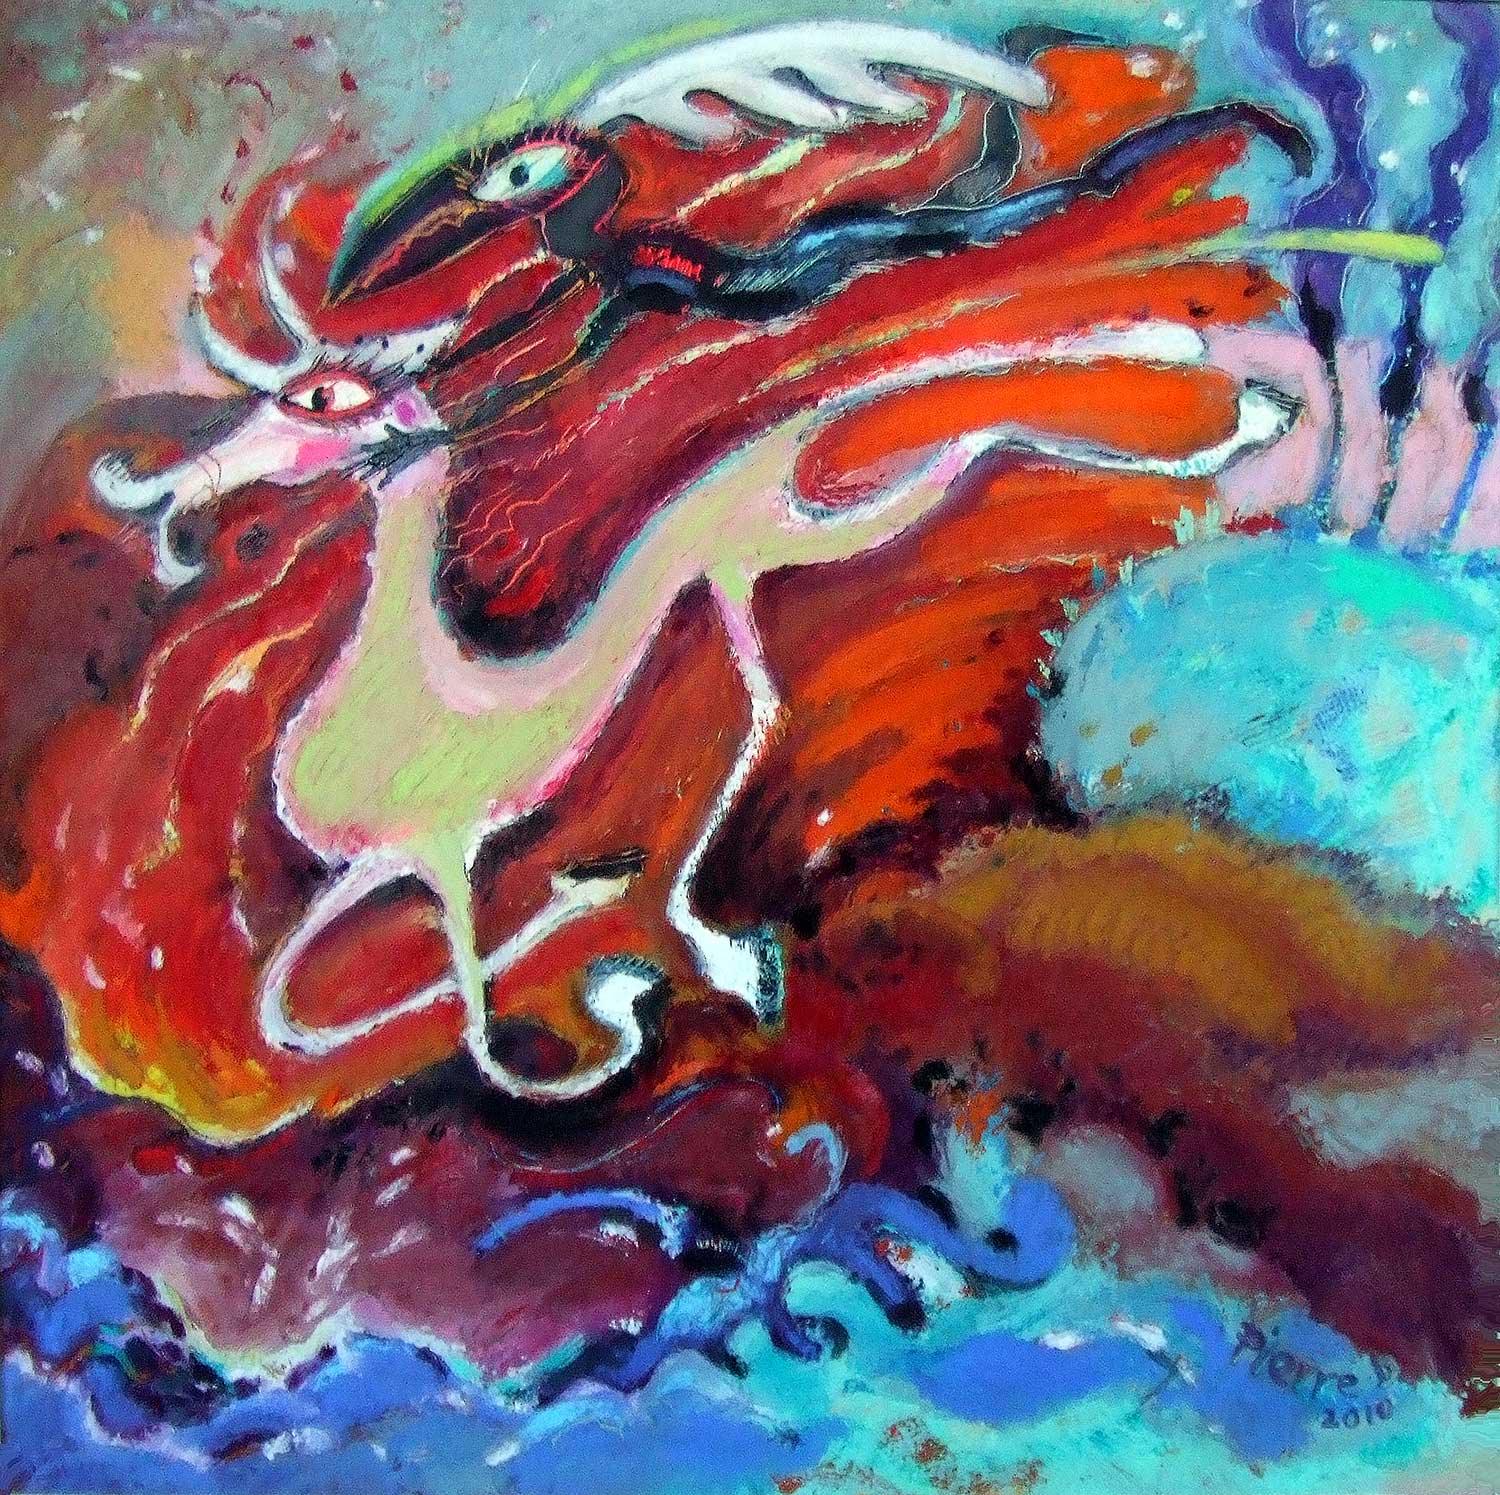  Fire Horse &nbsp; ©  Oil and oil pastel on fine paper  38 cm high x 38 cm wide  "The exaggerated, tangled legginess of this lime-white horse makes it all the more vulnerable in the clutches of the Harpy." 